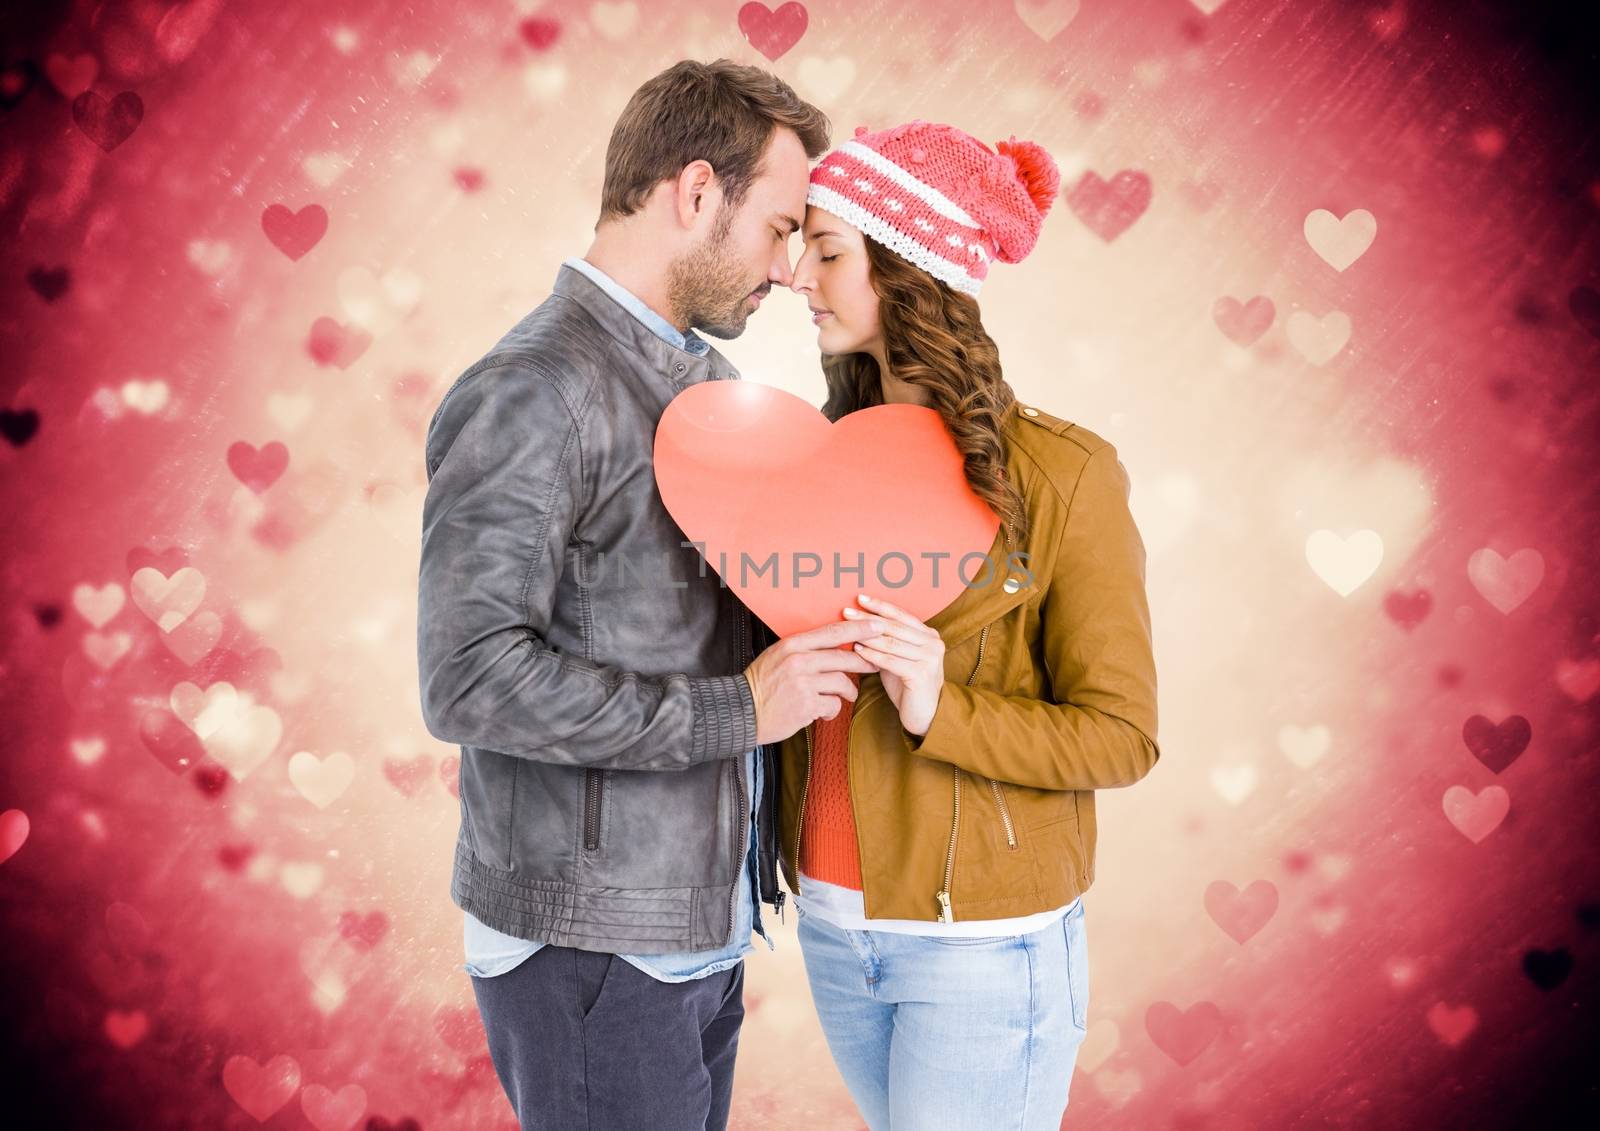 Composite image of romantic couple holding a heart